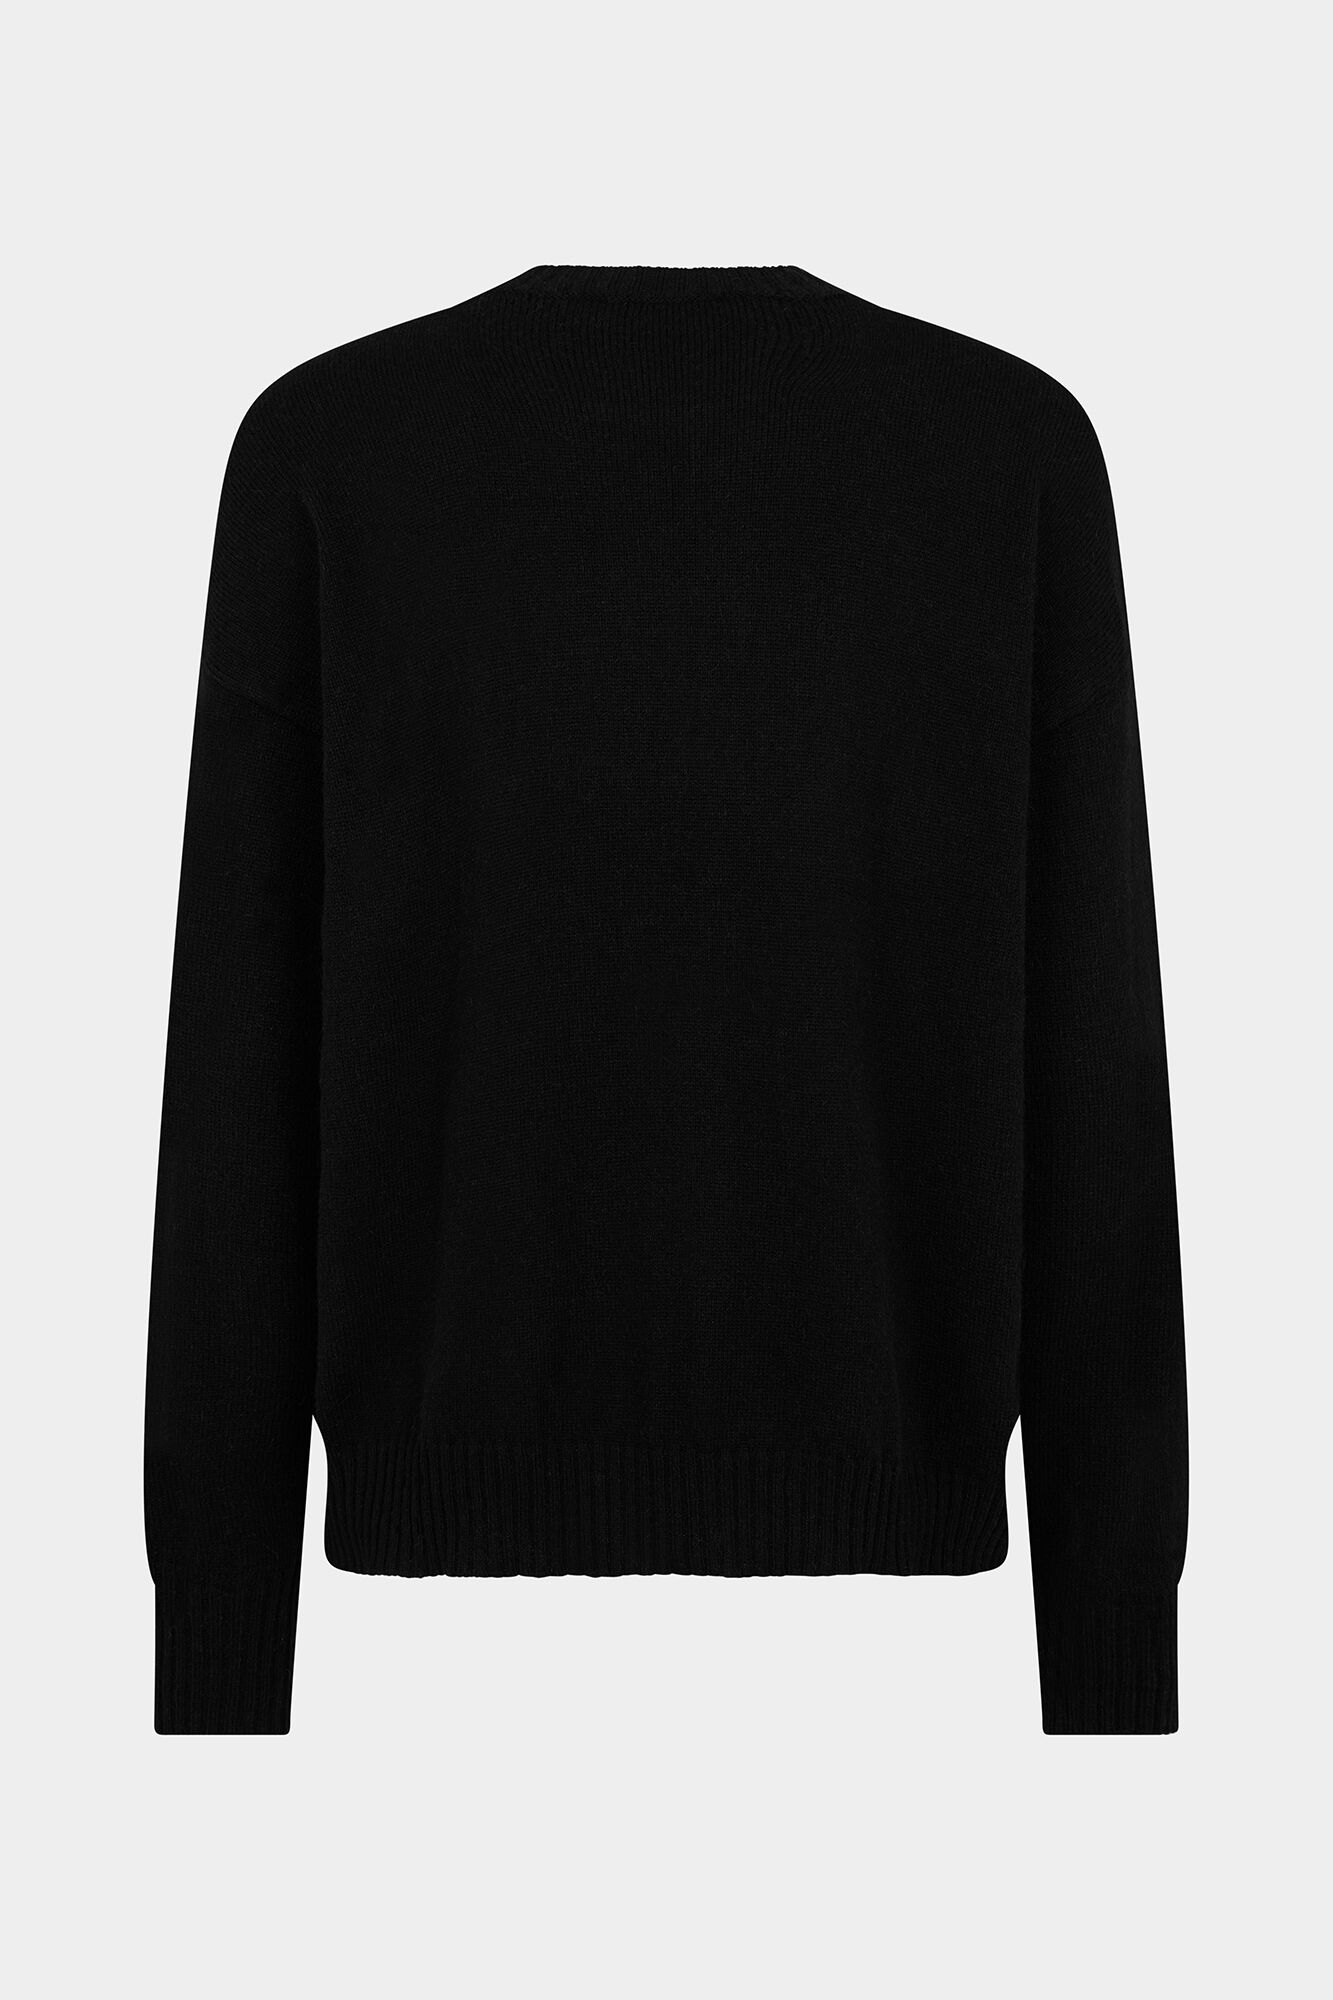 Gothic Knit Crewneck Pullover